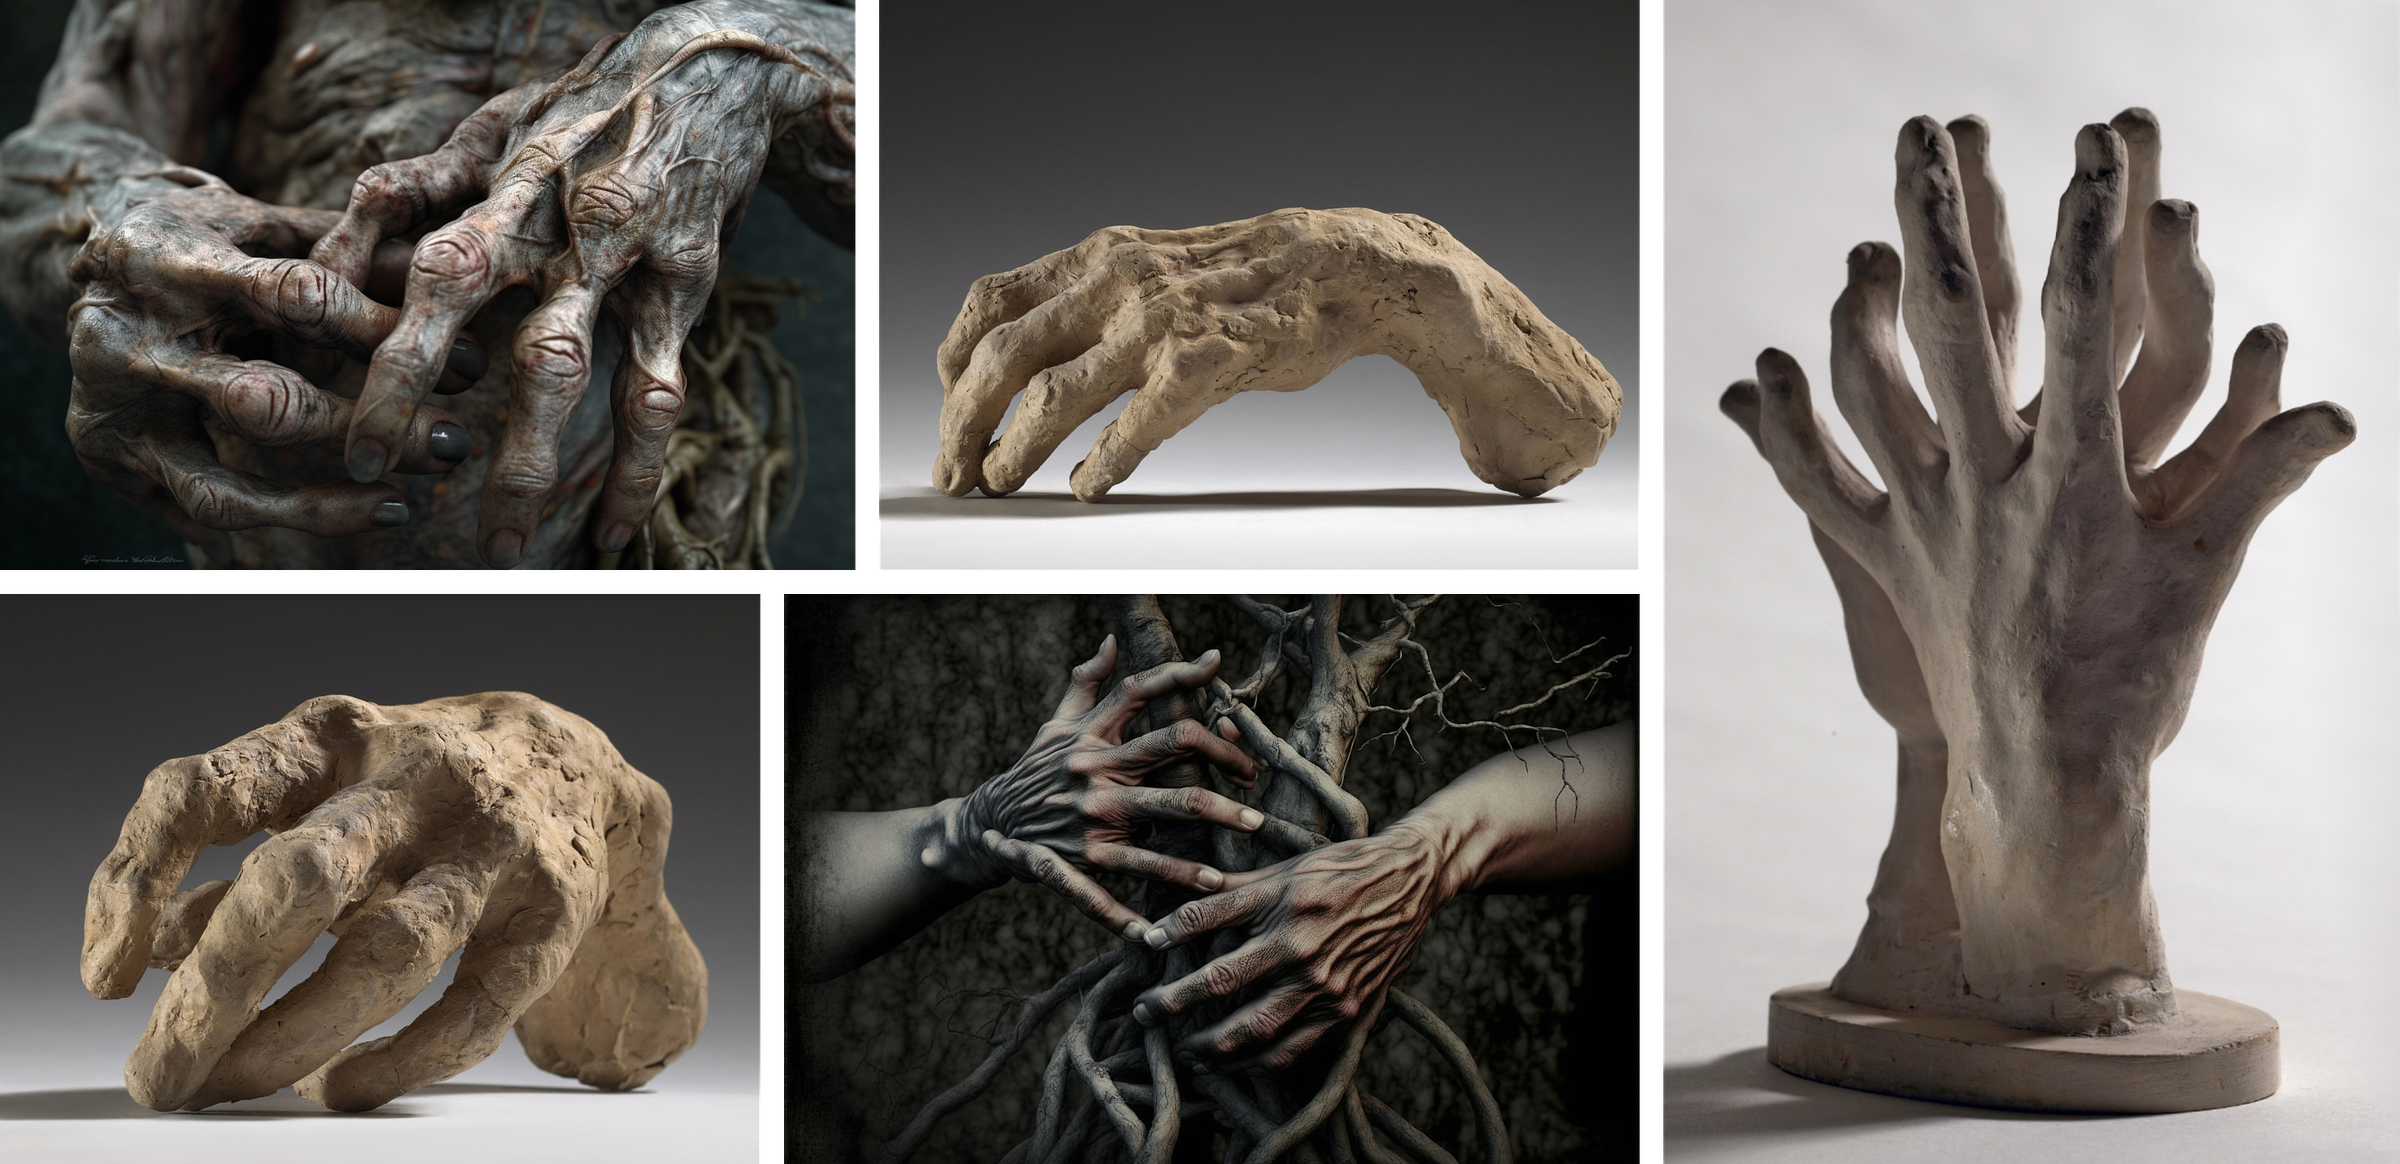 Two images of hands by Miele and three photos of Rodin hand sculptures. Miele: 1) The backs of two very weathered, leathery, old, or emaciated hands in an unreal, fleshy, gray color. Their muscles and tendons are visible through the skin. They could be from a decaying corpse. Behind them are weird, branch-like features. 2) Two hands extending toward each other. They are very veiny and one of them has six fingers, all spread apart. They appear to be resting on, or attempting to grasp at, a tangle of thin tree branches behind them, and a tree trunk fills the background. Rodin: 3), 4) Two views of a terracotta lumpy textured left hand loosely modeled with realistic proportions in a relaxed position. The back of the hand’s irregular surface has deep valleys and prominent tendons. 5) A plaster cast of two identical left hands, cropped a few inches above the wrists, positioned upright palm to palm, slightly offset from each other. Their symmetrical silhouette makes a wavy, branching, or coral-like effect.